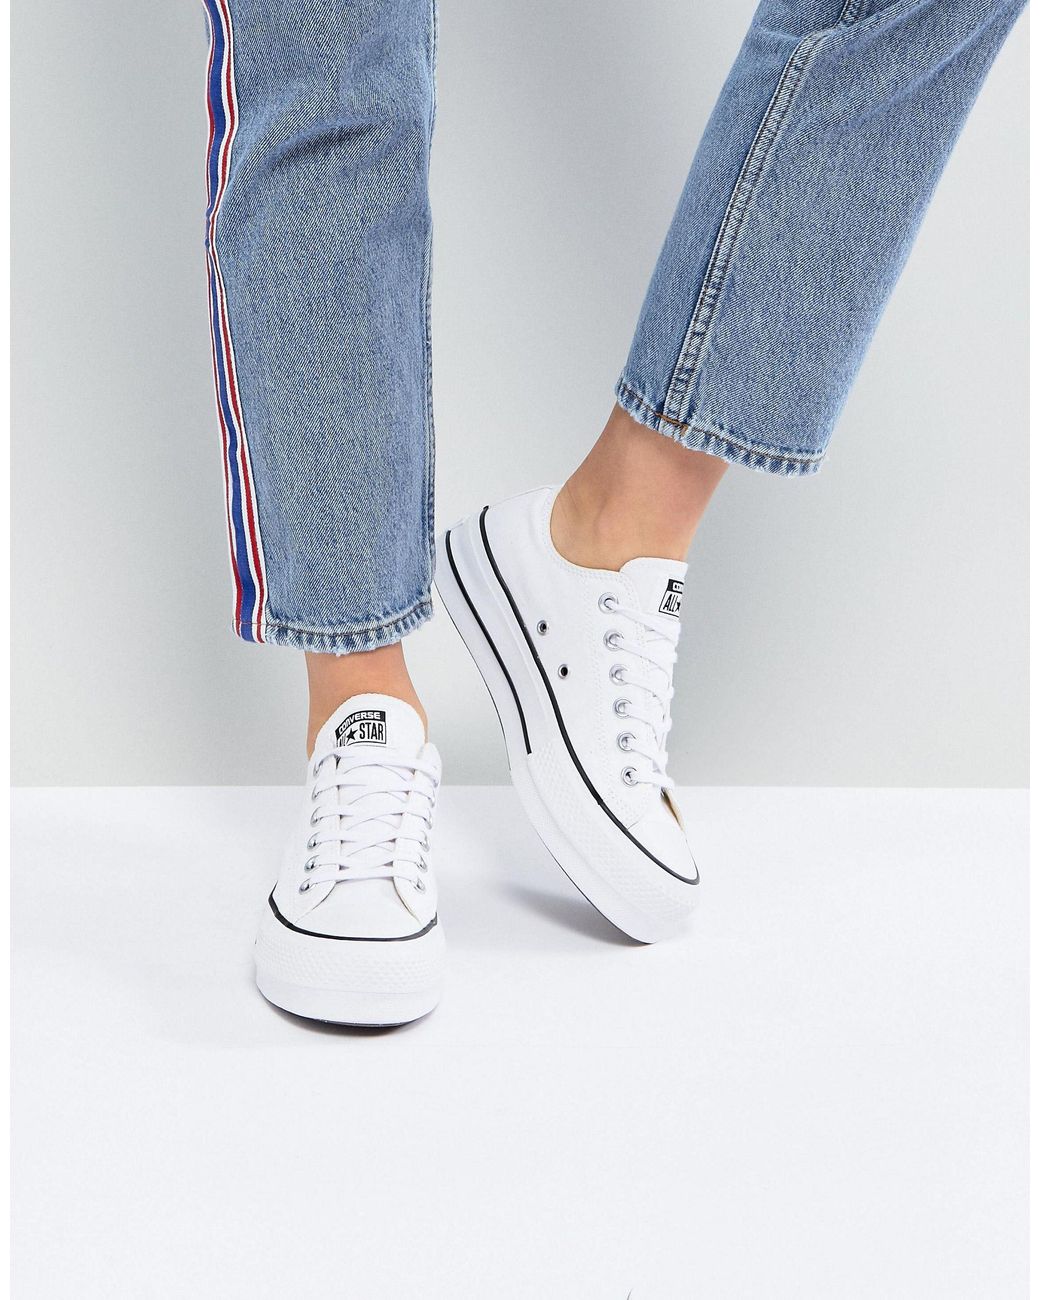 Converse Chuck Taylor All Star Ox Canvas Platform Sneakers in White | Lyst